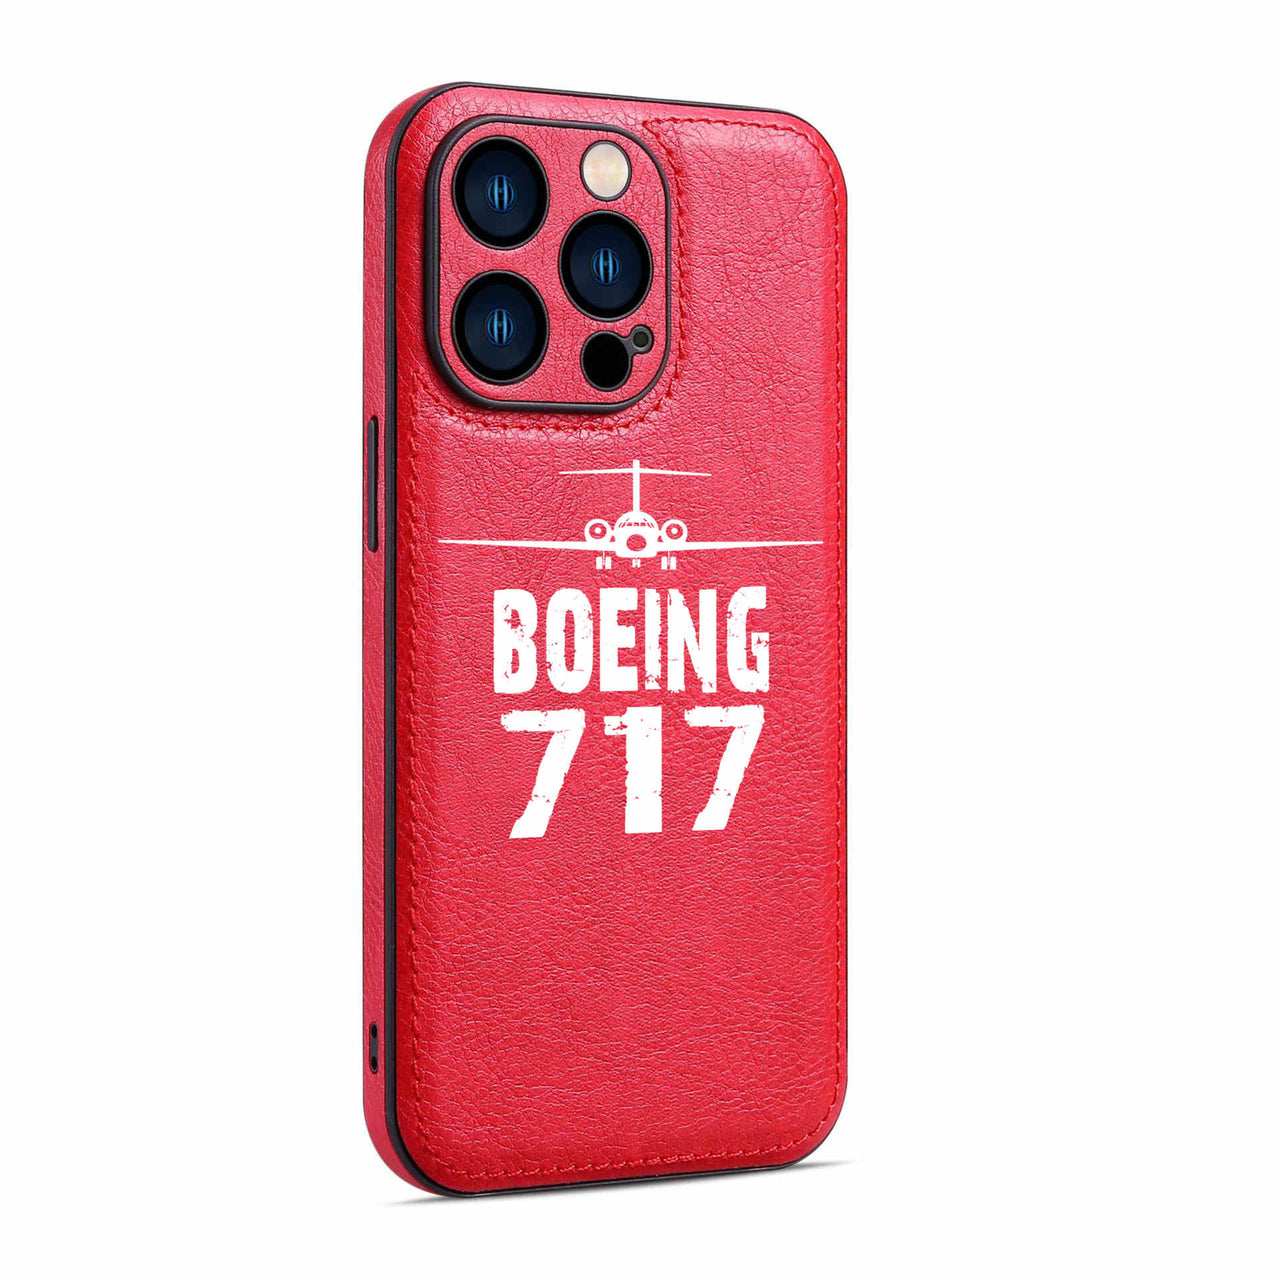 Boeing 717 & Plane Designed Leather iPhone Cases